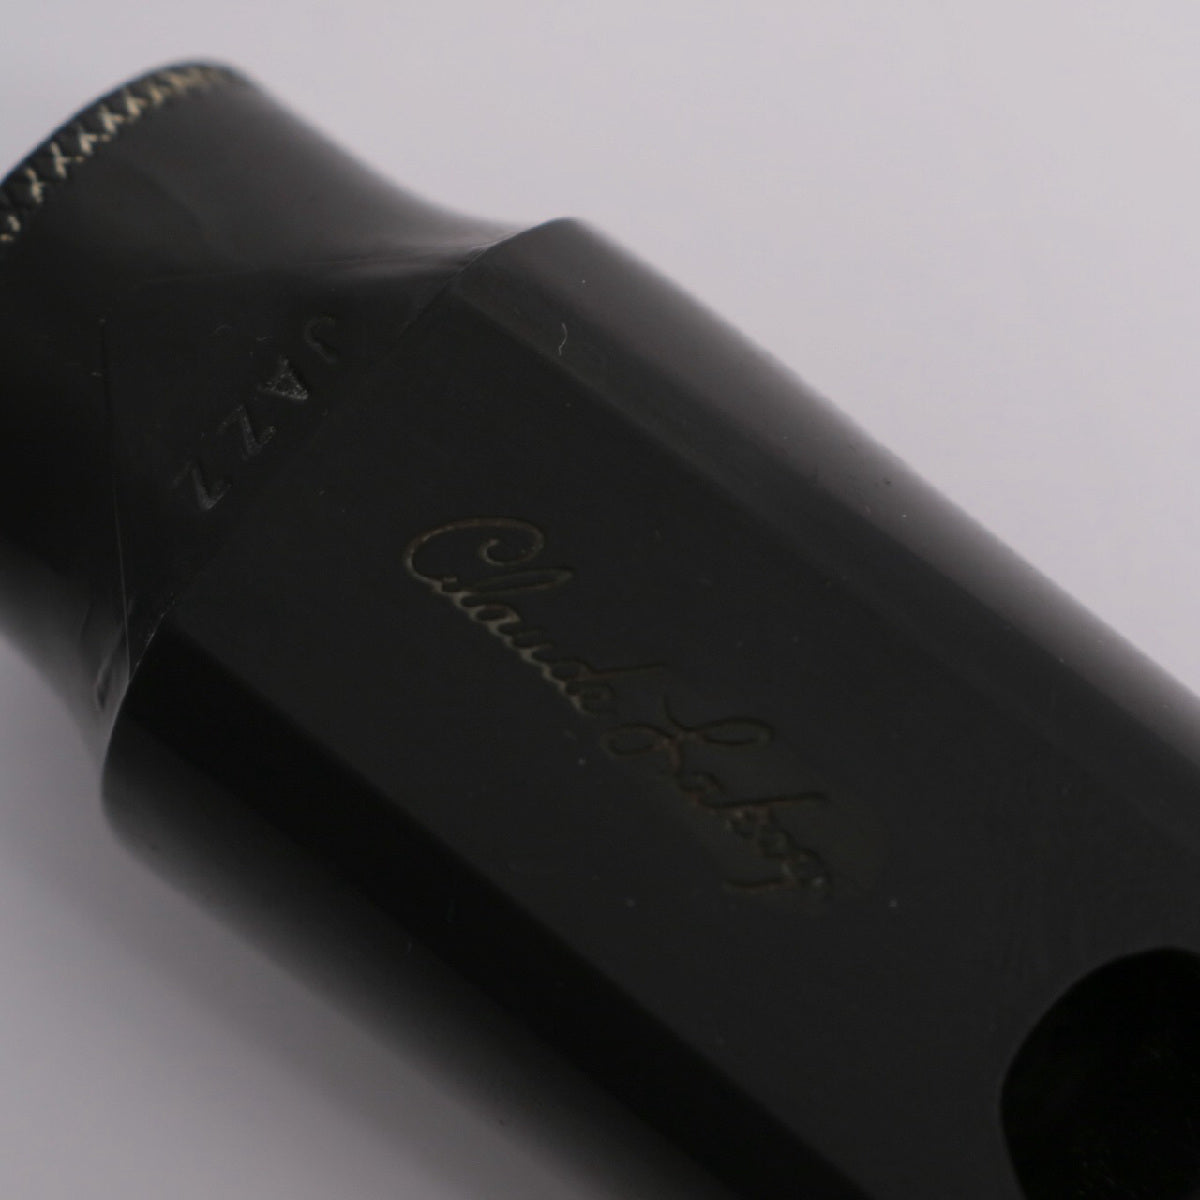 USED CLAUDE LAKEY Cloud Lakey / Mouthpiece for Alto 5*3 [03]